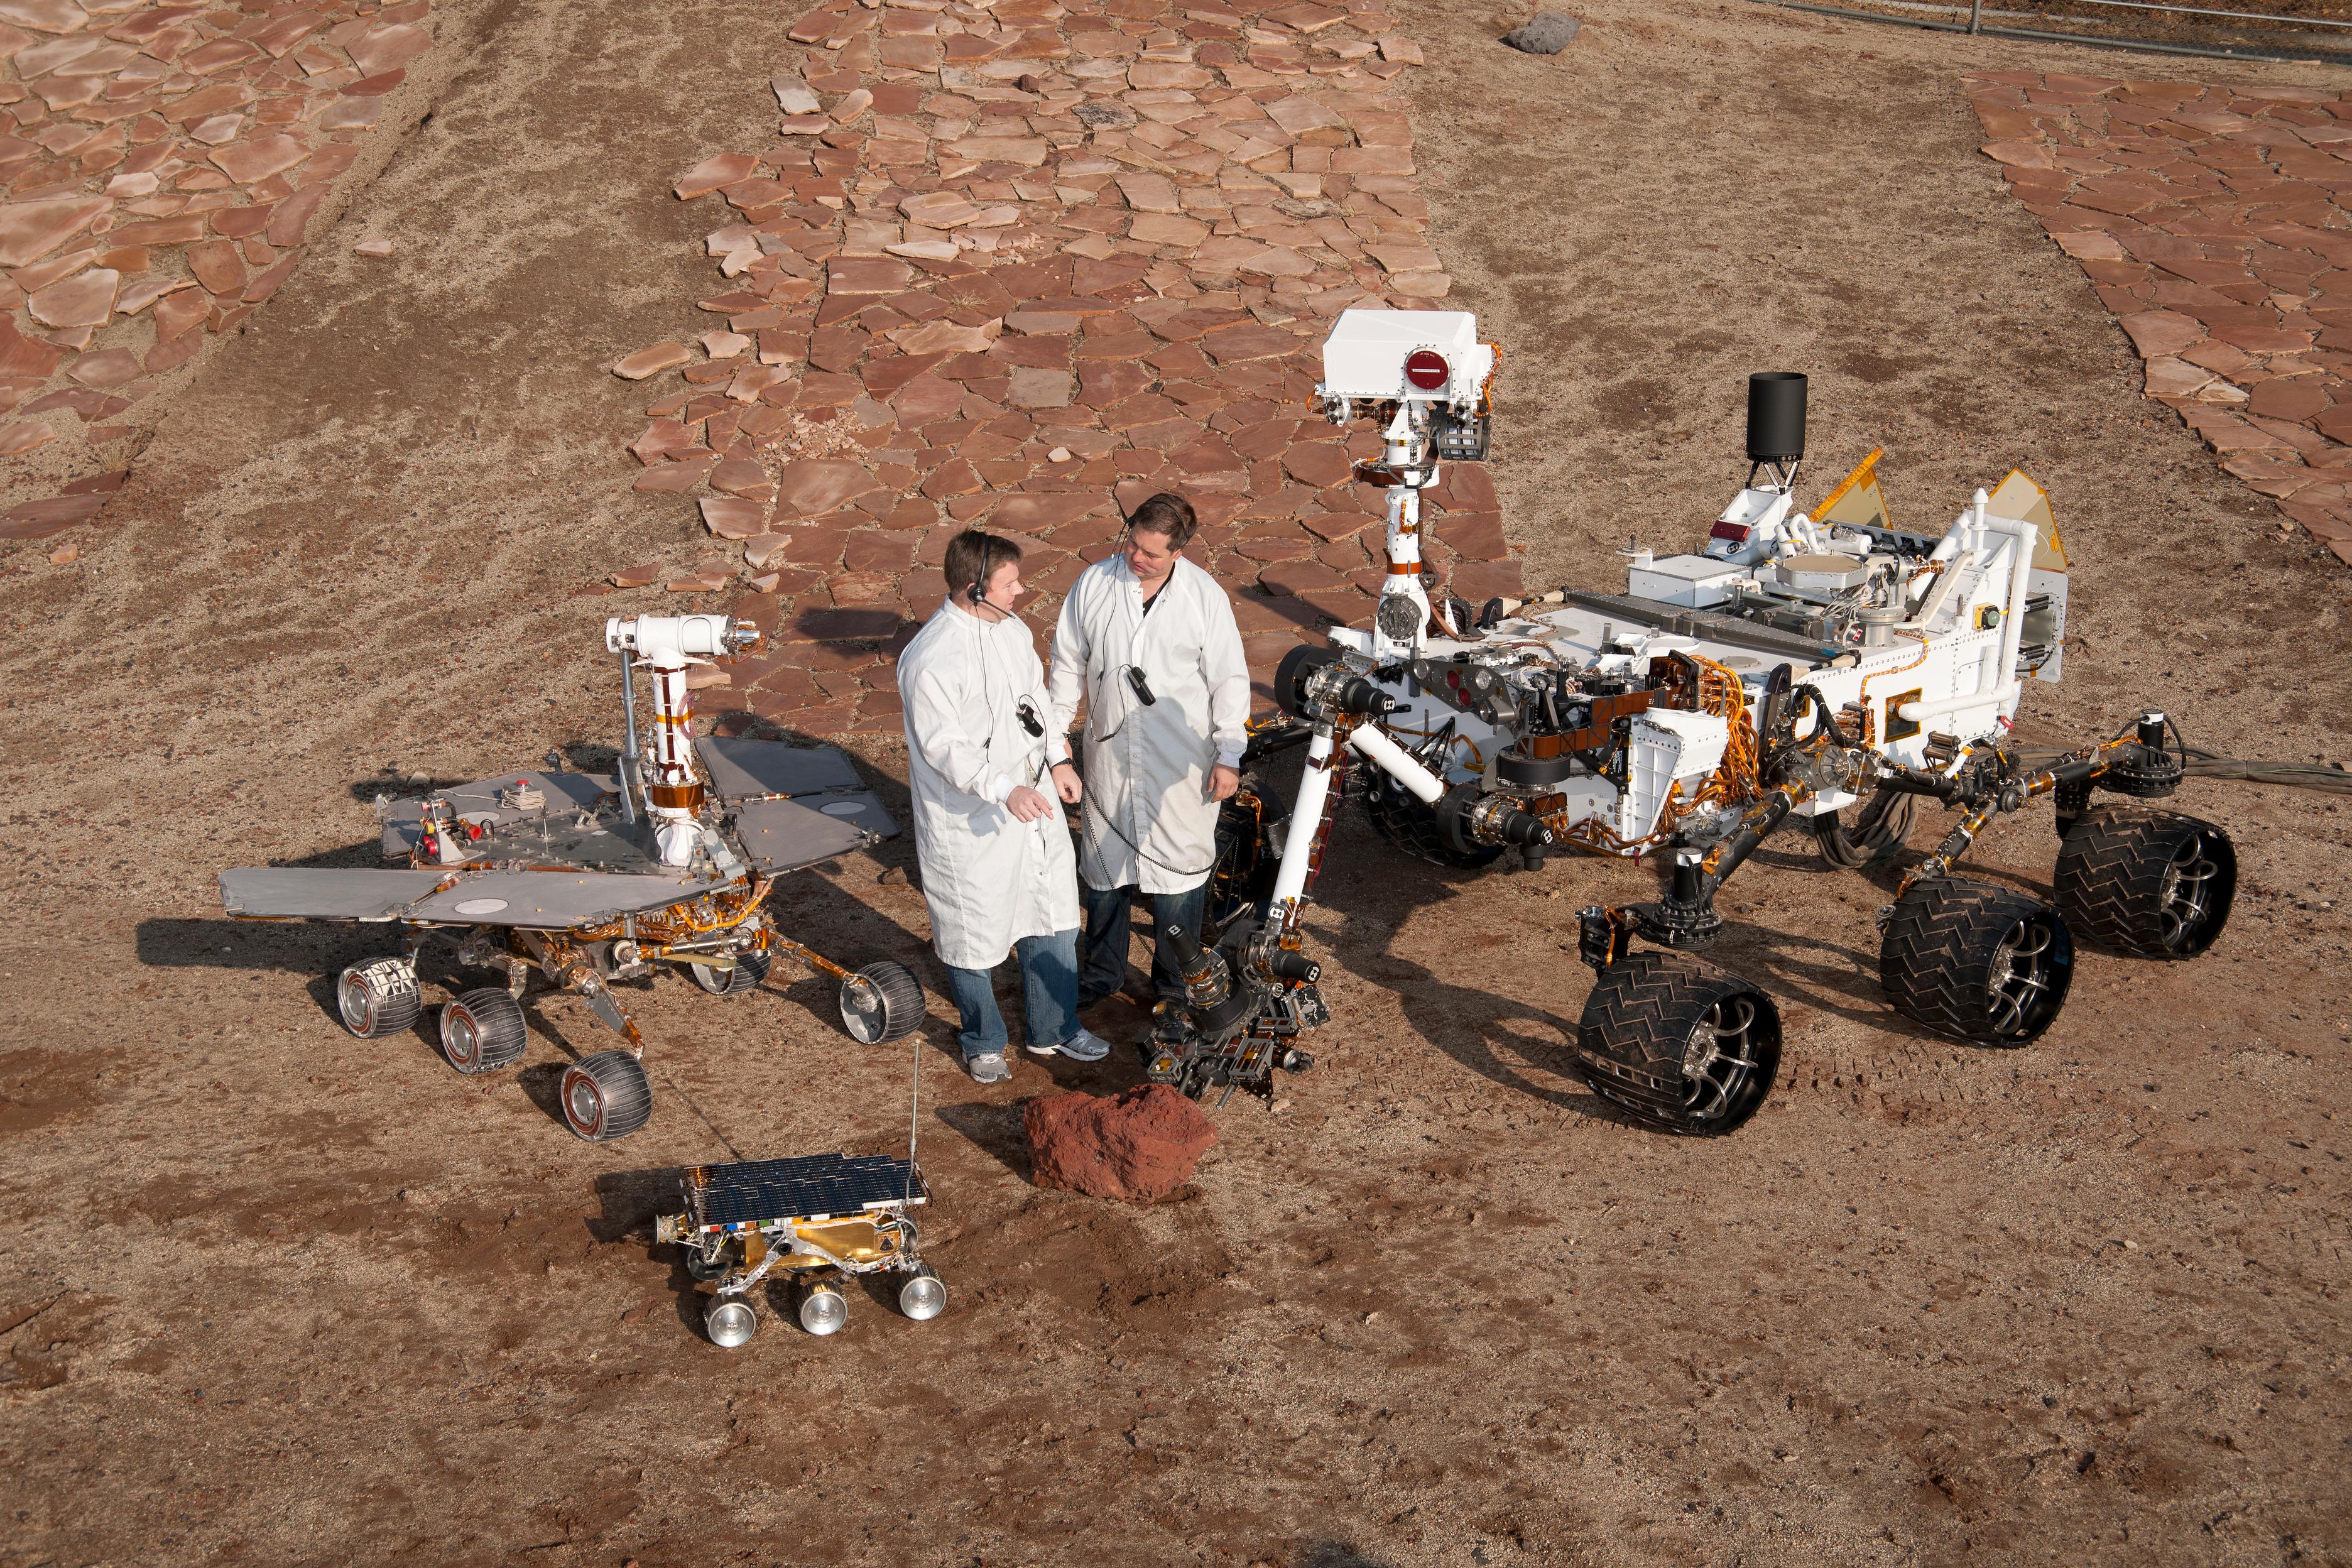 Two spacecraft engineers stand with a group of vehicles providing a comparison of three generations of Mars rovers developed at NASA's Jet Propulsion Laboratory, Pasadena, Calif. The setting is JPL's Mars Yard testing area.